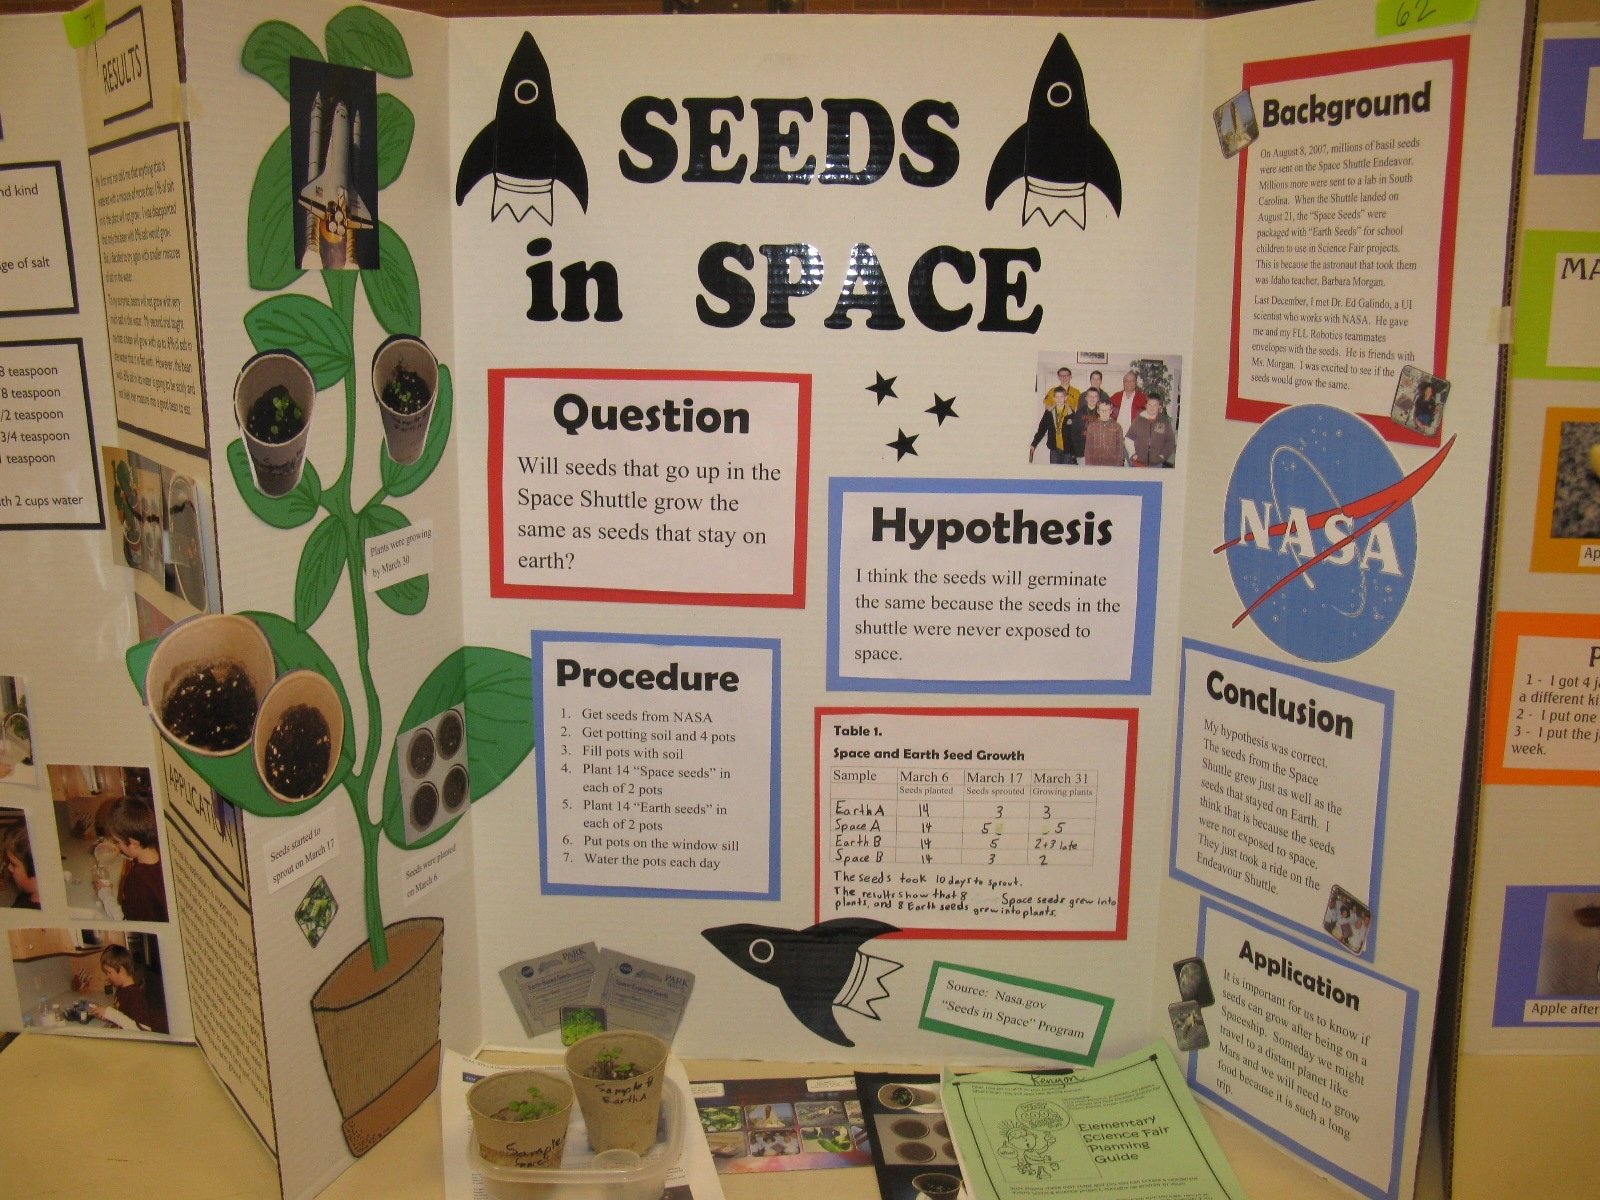 10 Perfect Science Fair Project Ideas 4Th Grade science project sample daway dabrowa co 1 2022